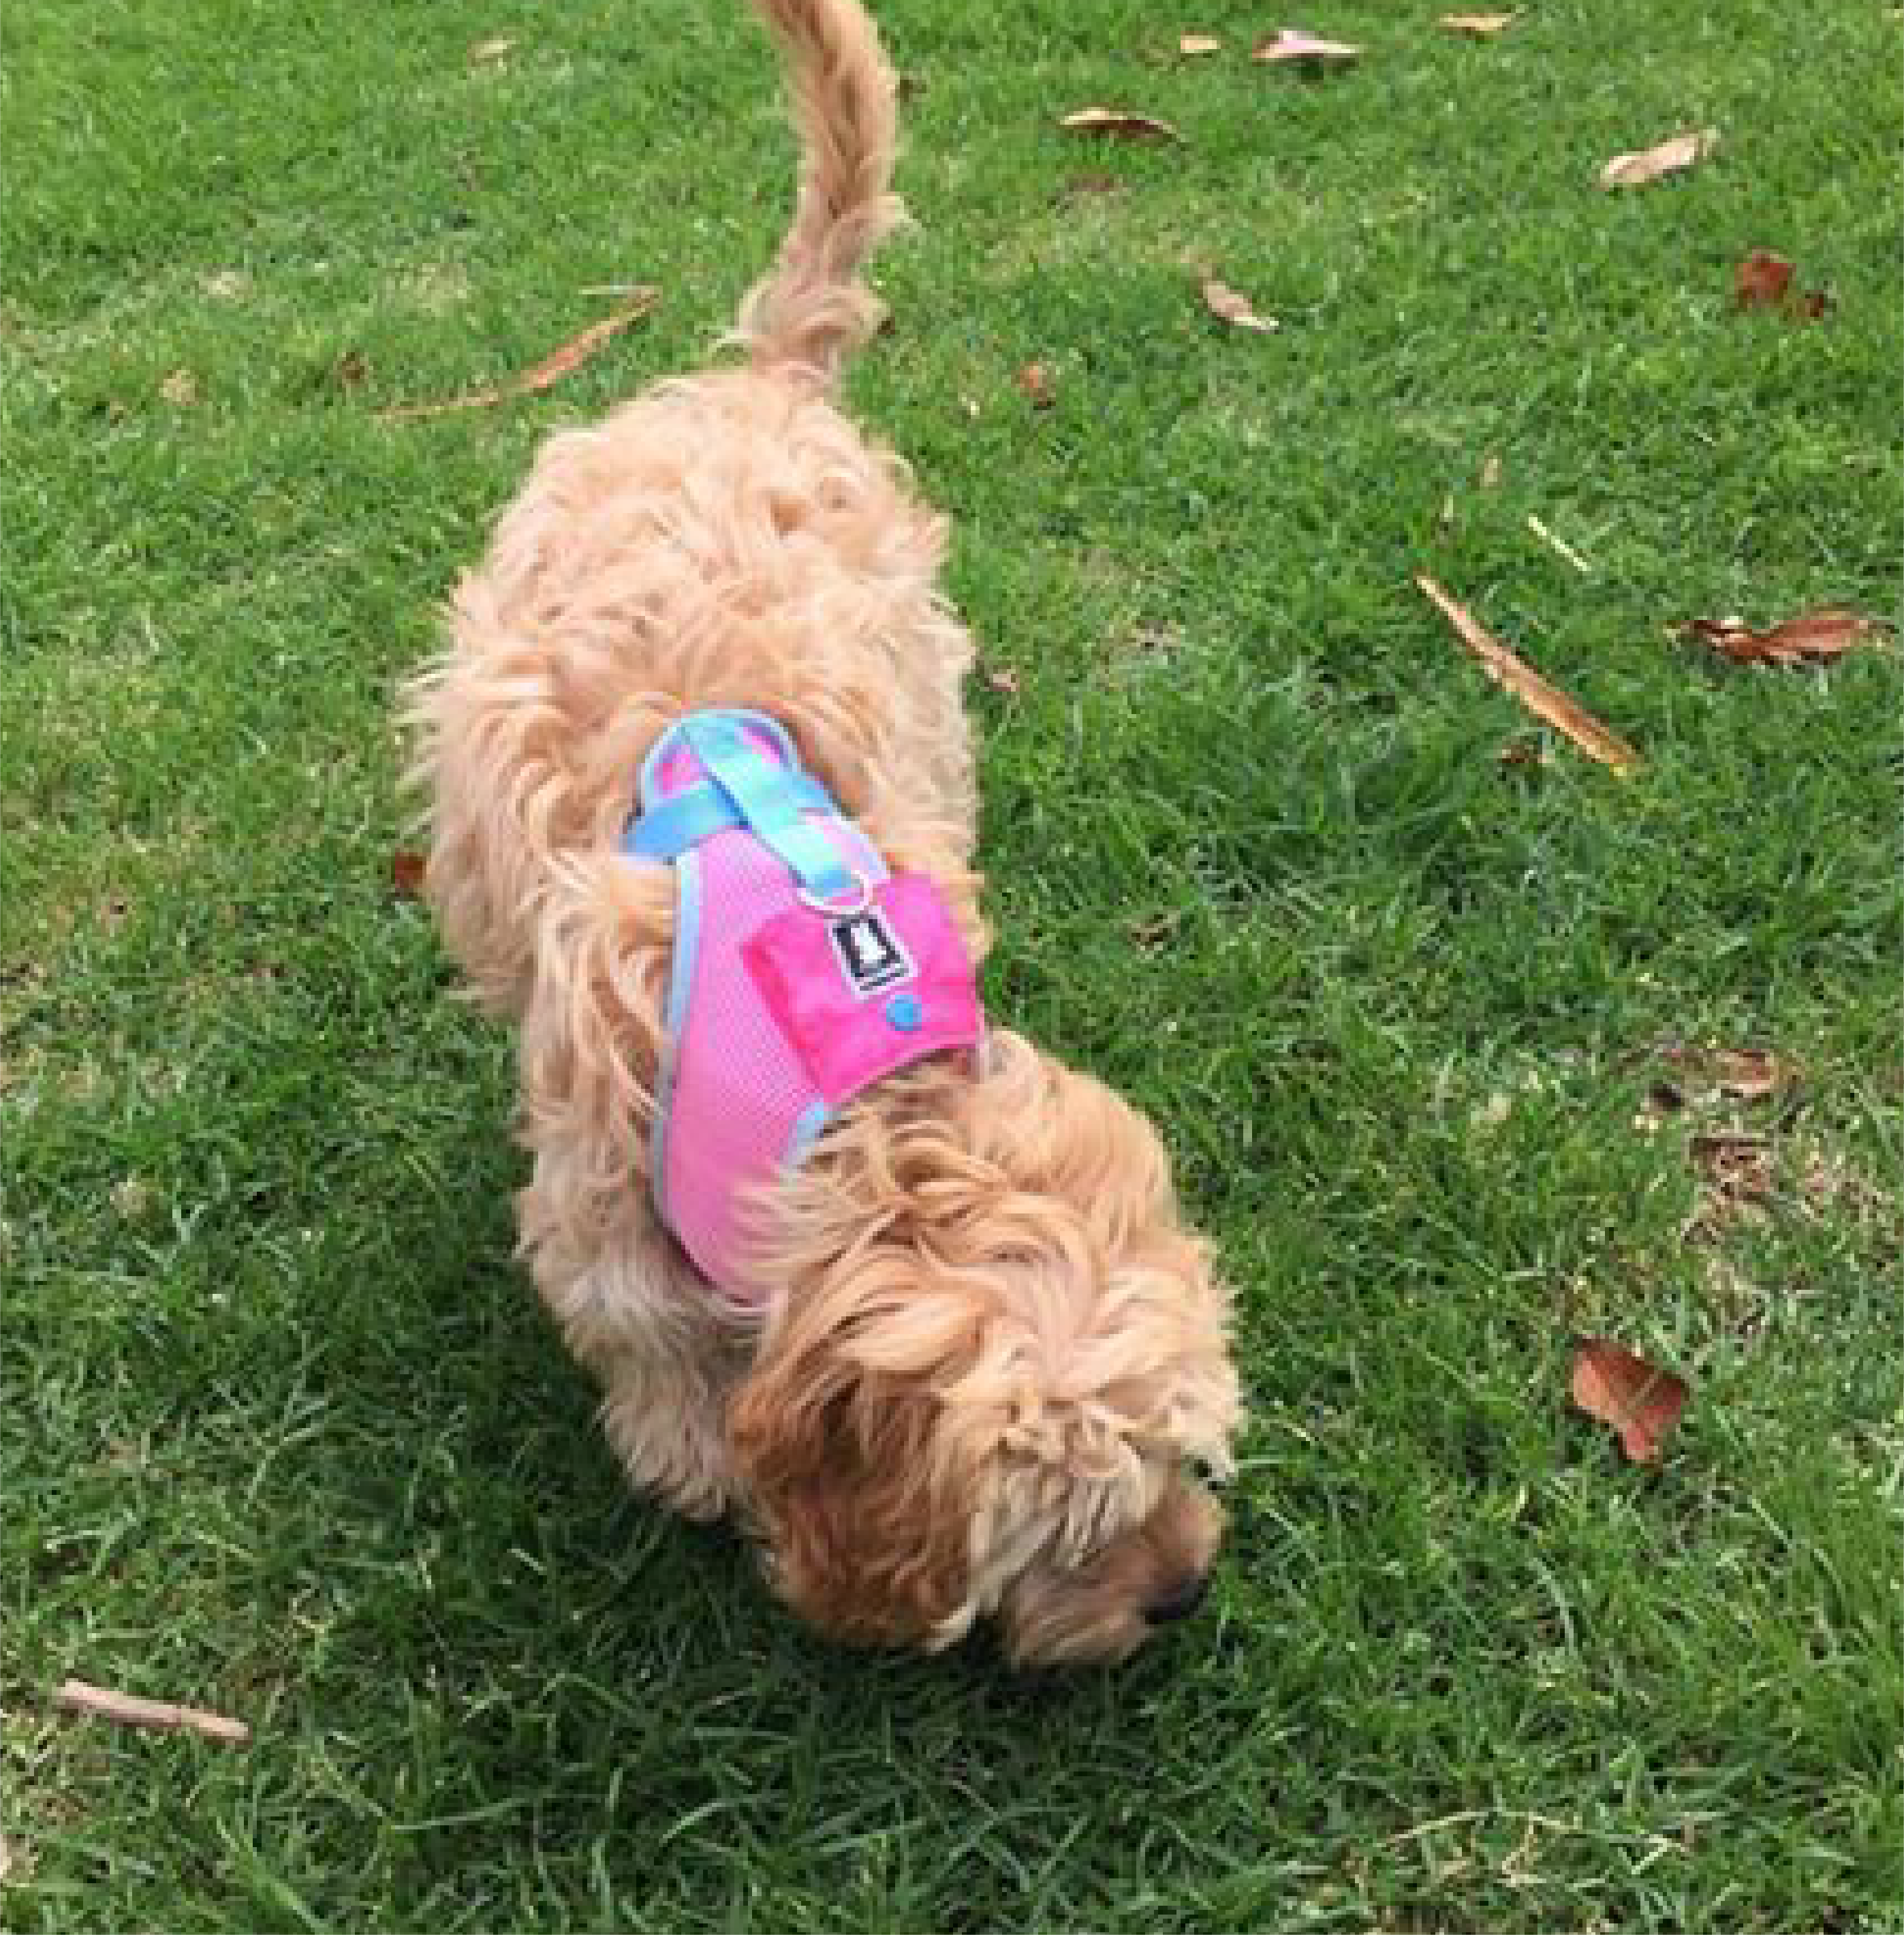 Dog with pink harness